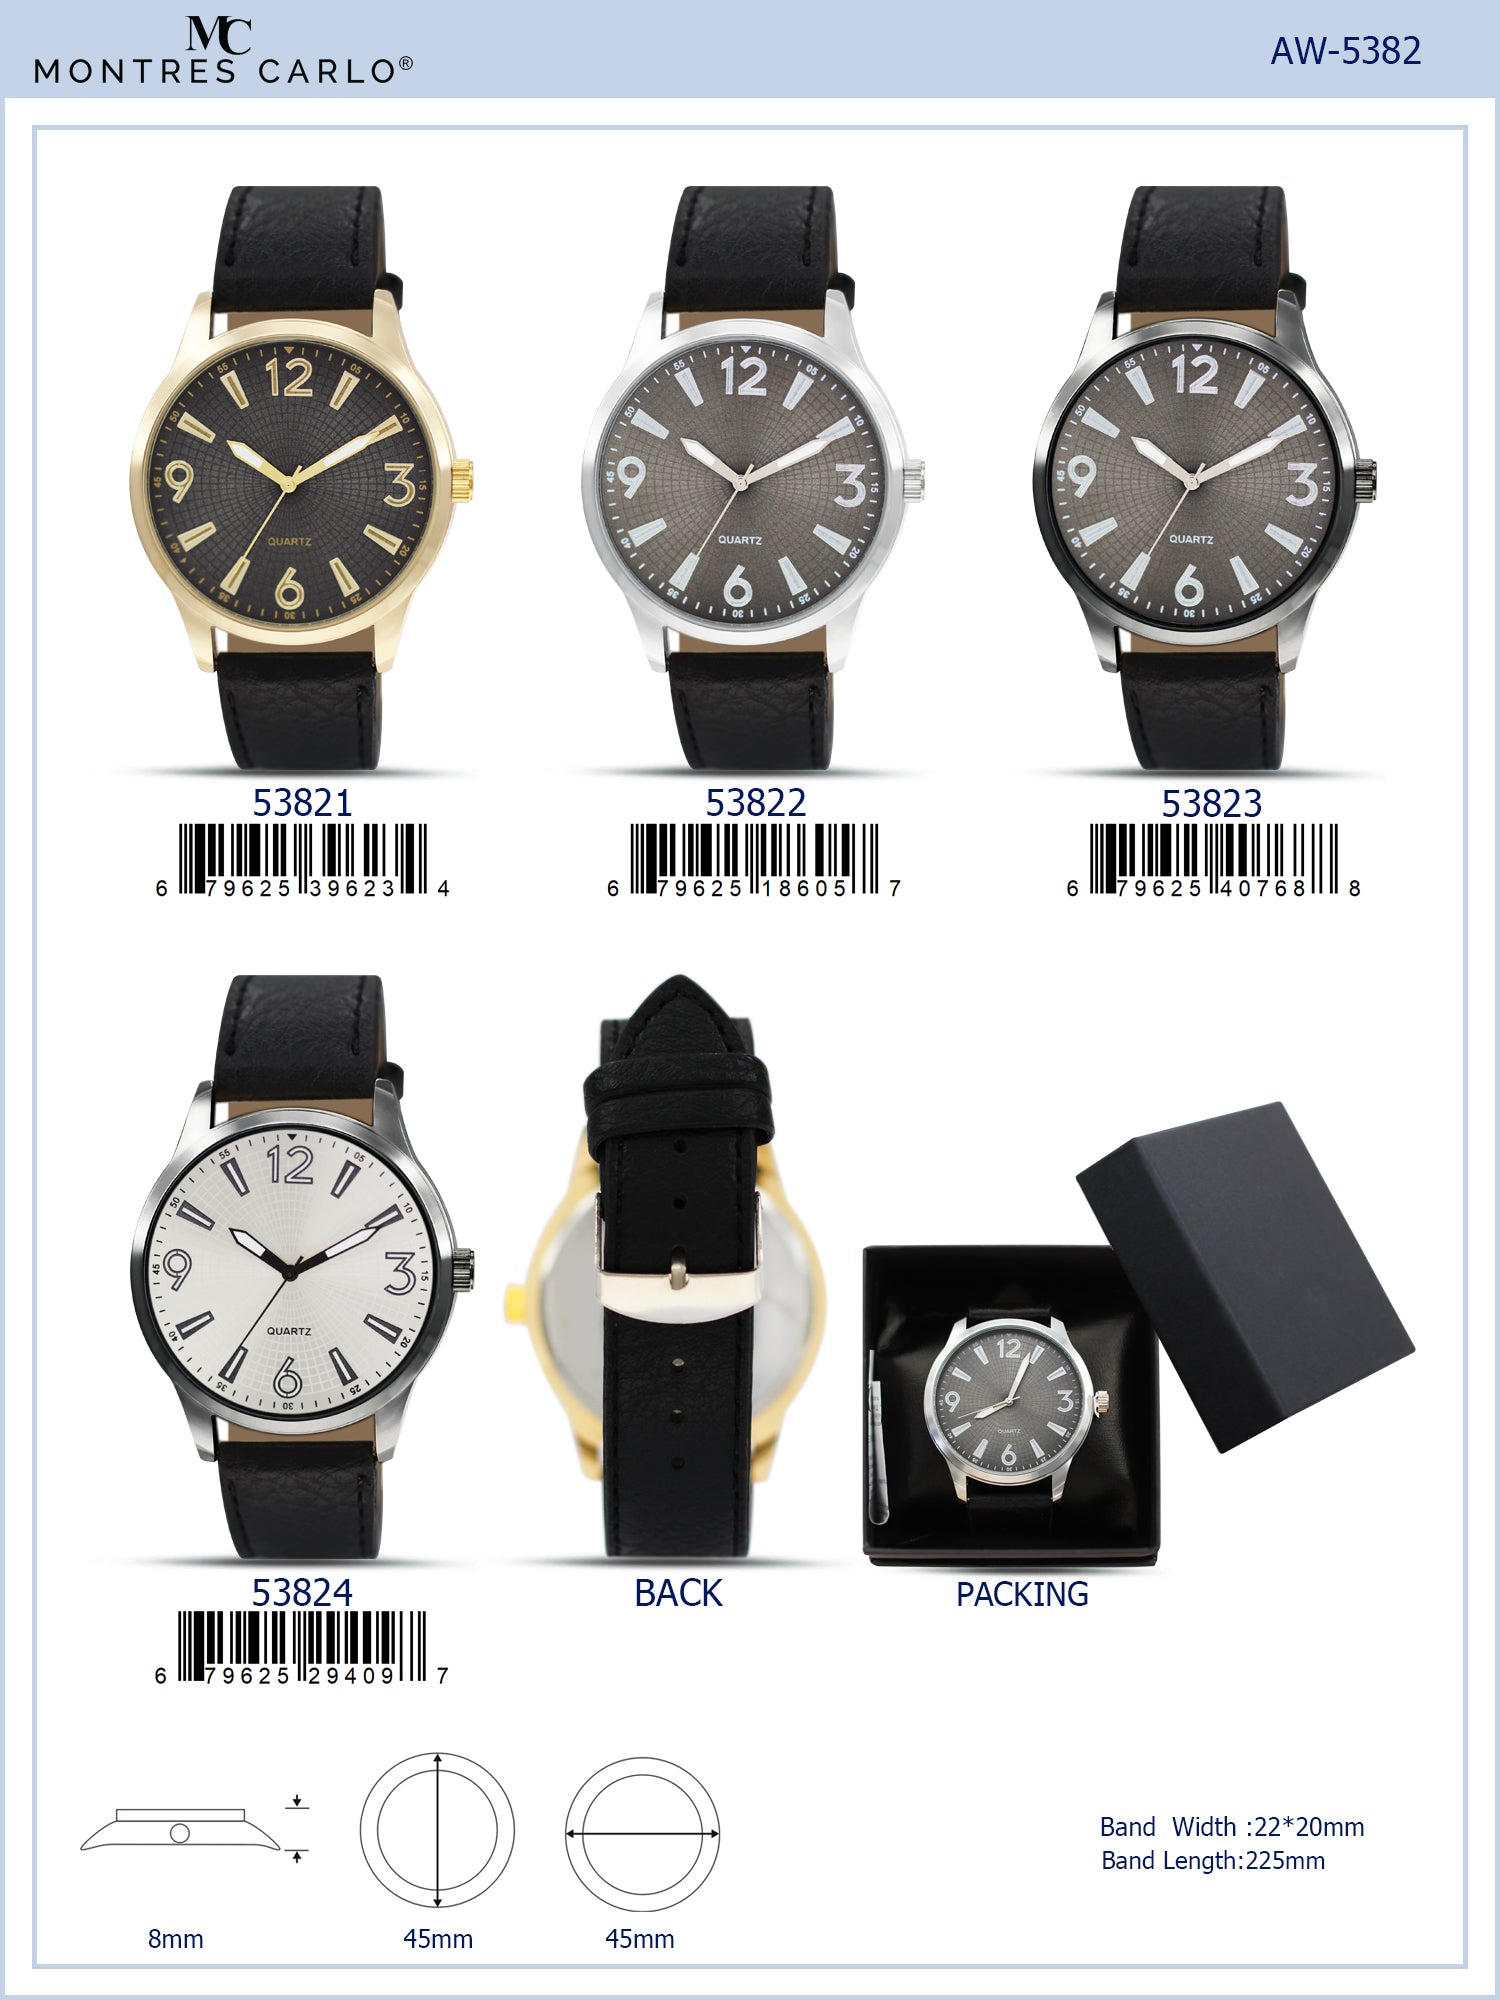 5382-B8-Gift Boxed Faux Leather Strap Watch